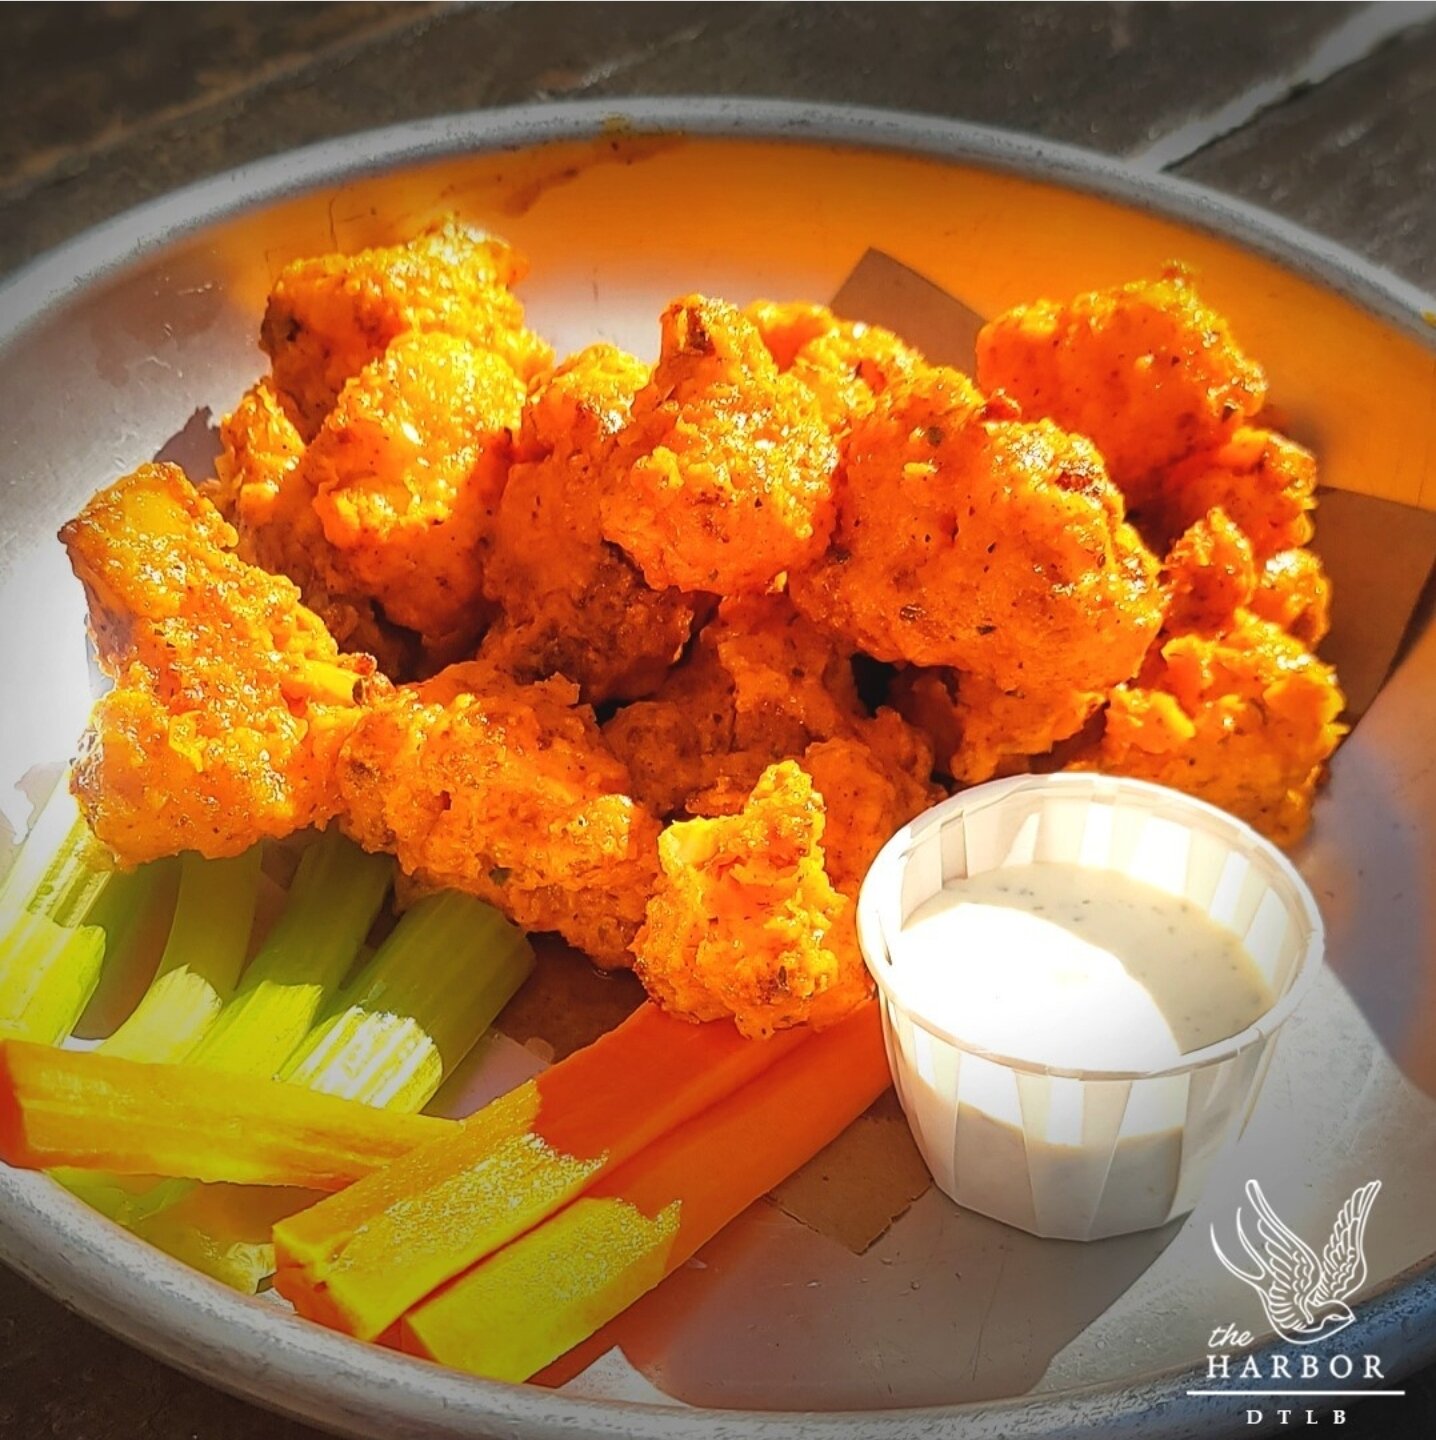 Keep it Lighter with our Buffalo Cauliflower! A Must Try! | Happy Hour from 4PM-8PM
.
.
.
.
#buffaloCauliflower #healthy #healtheats #theharborlb #Happyhour #LB #longbeach #lbc #dlba #downtownlb #craftcocktails #craftbeer #nomnom #instagood